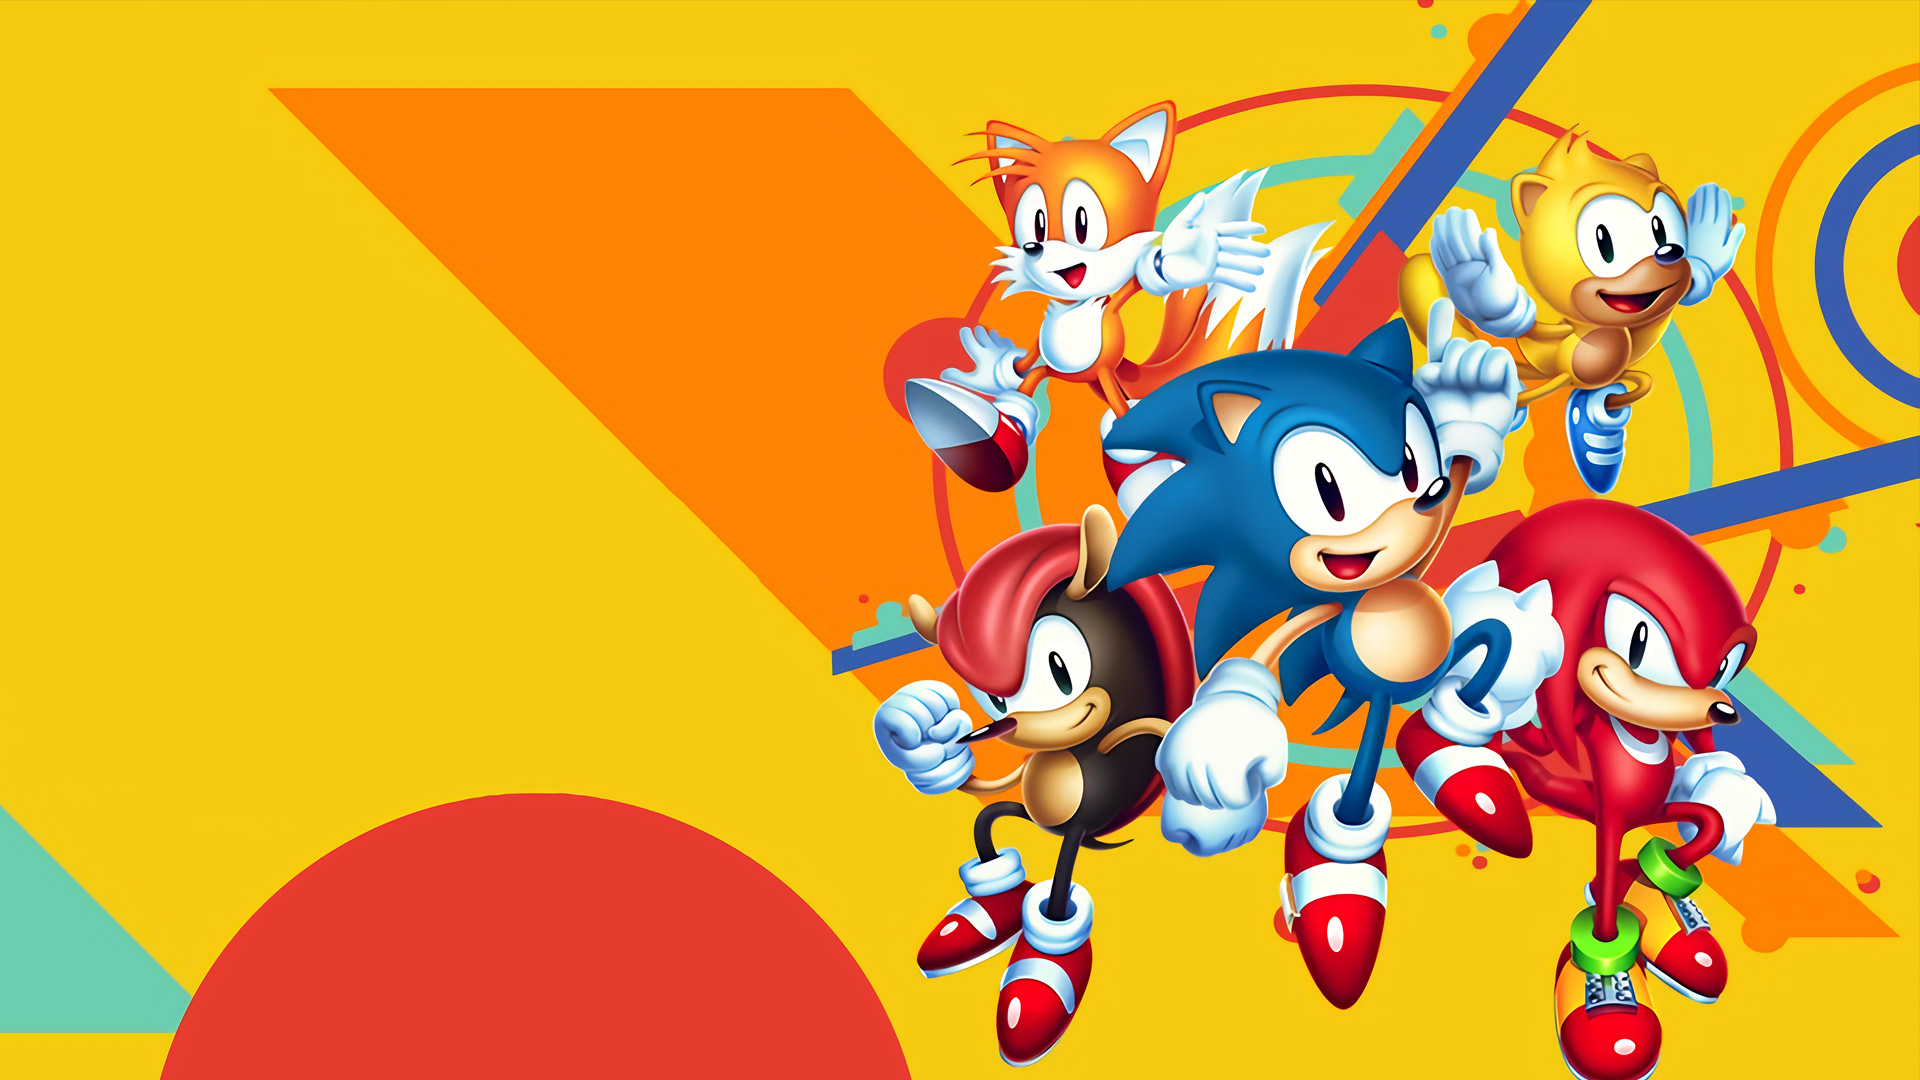 sonic mania steam trading cards